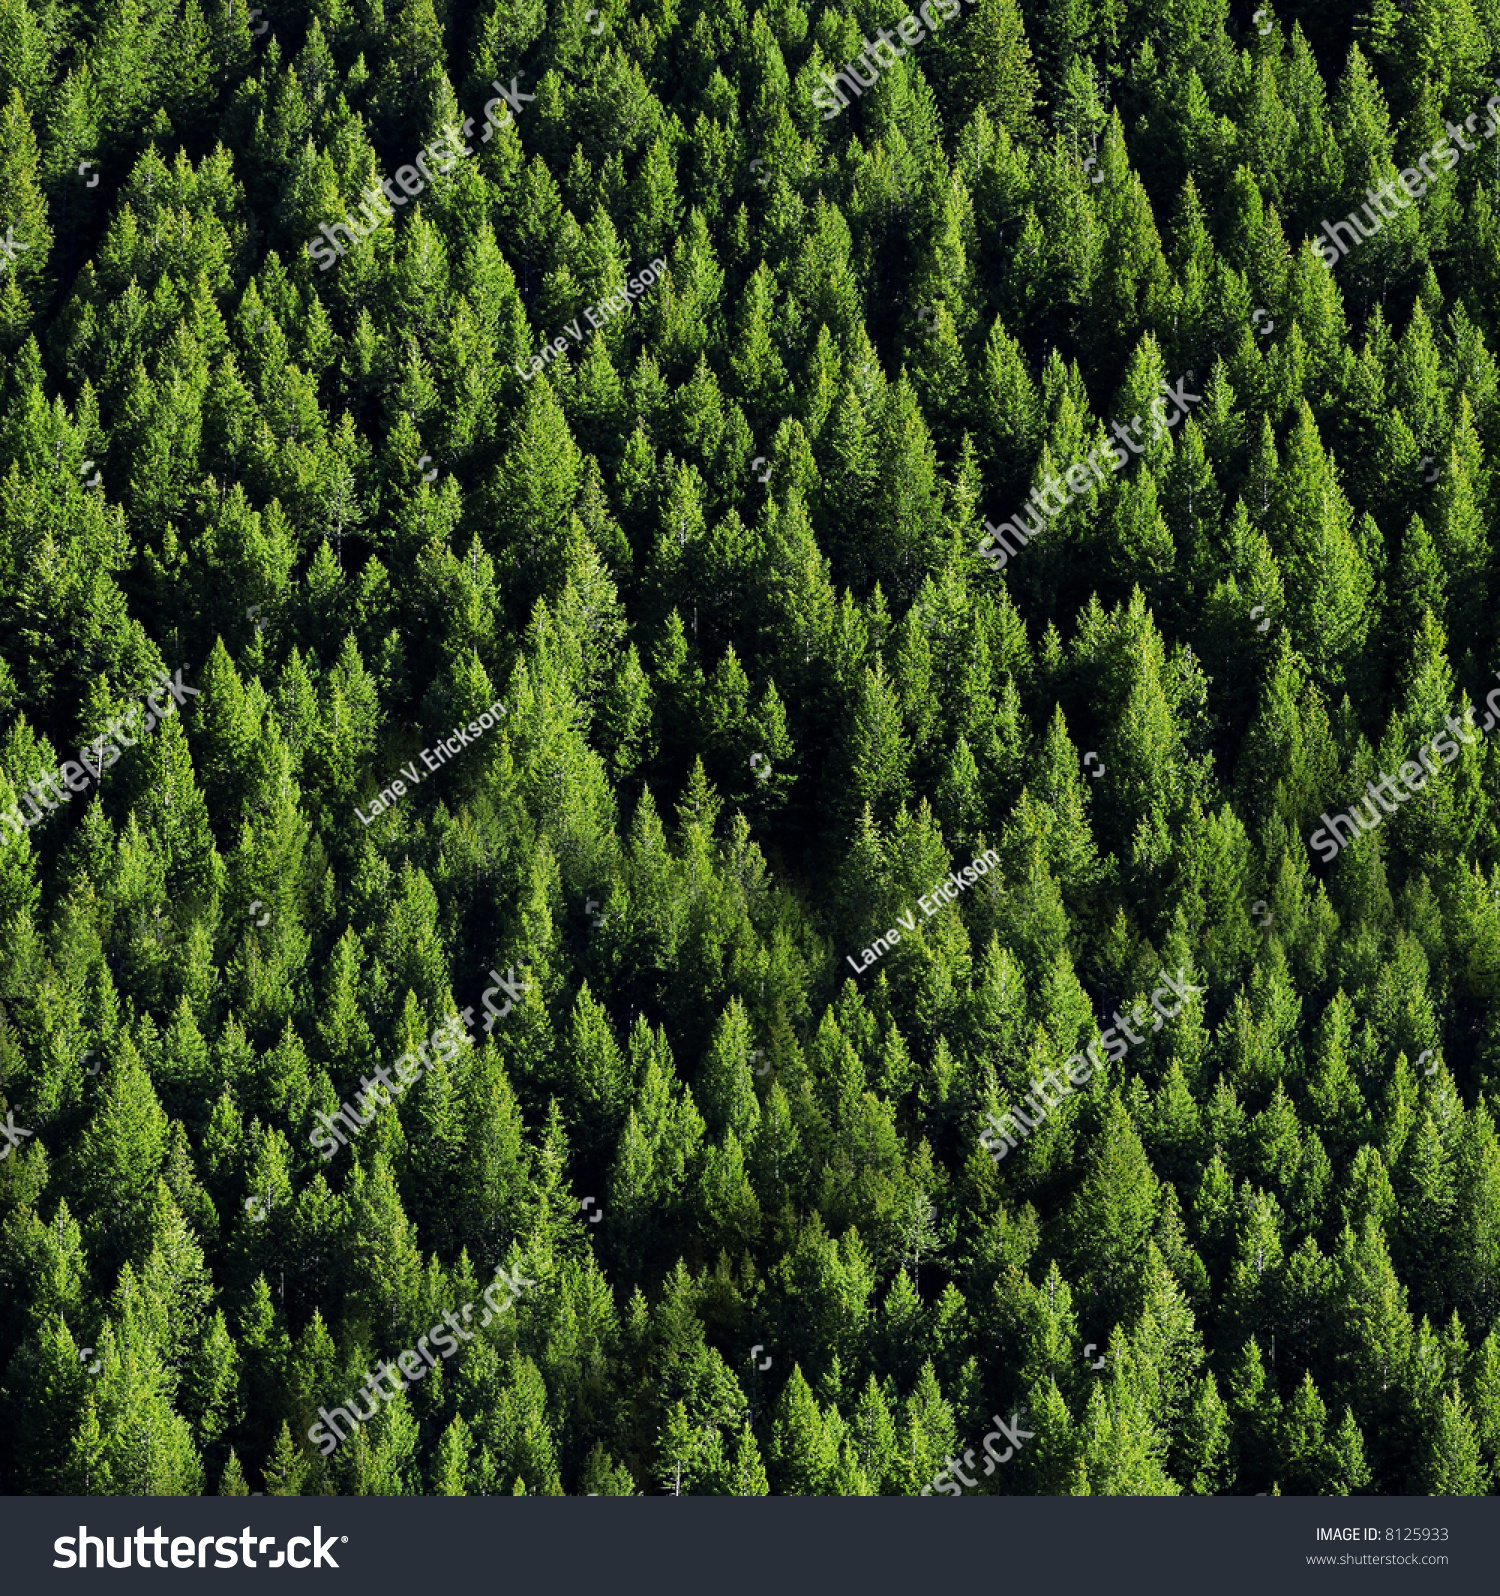 View Forrest Green Pine Trees On Stock Photo 8125933 - Shutterstock